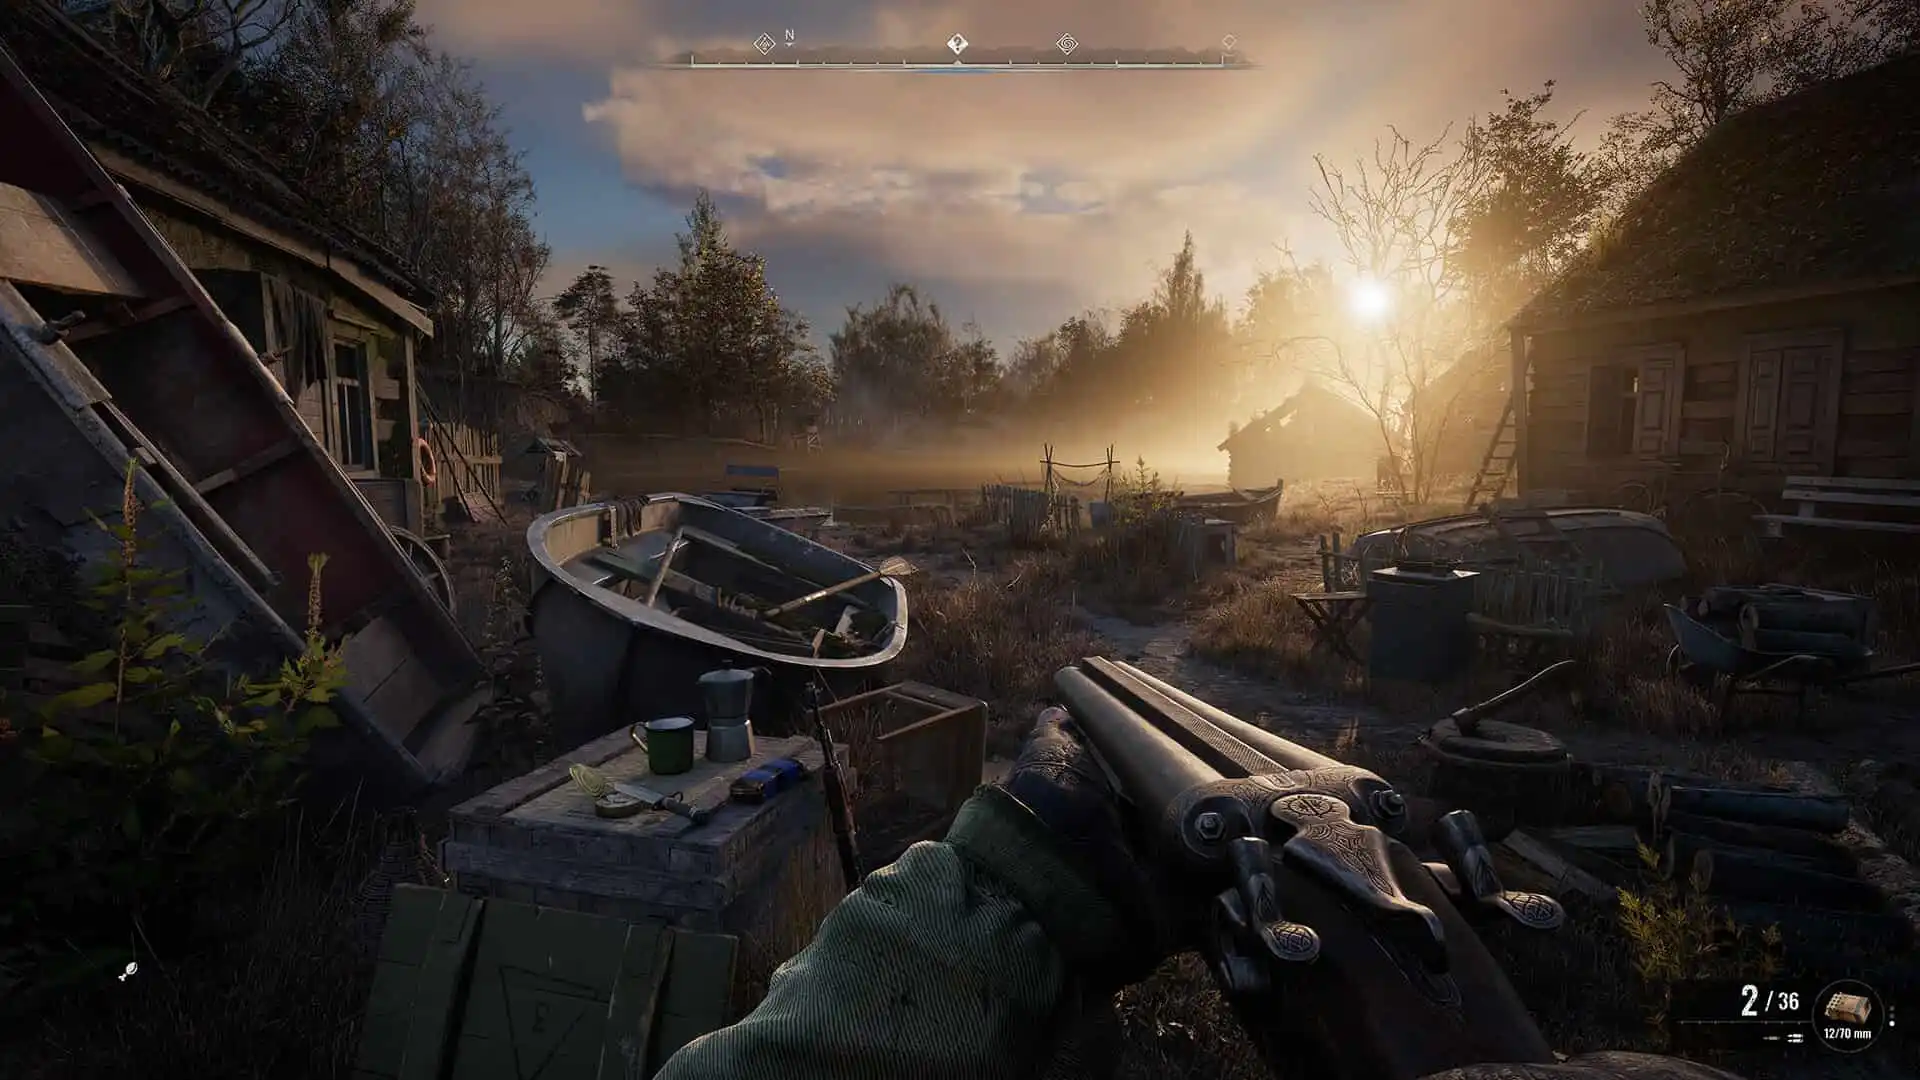 A character holding a shotgun looks out at a sunrise over a ruined and deserted town.